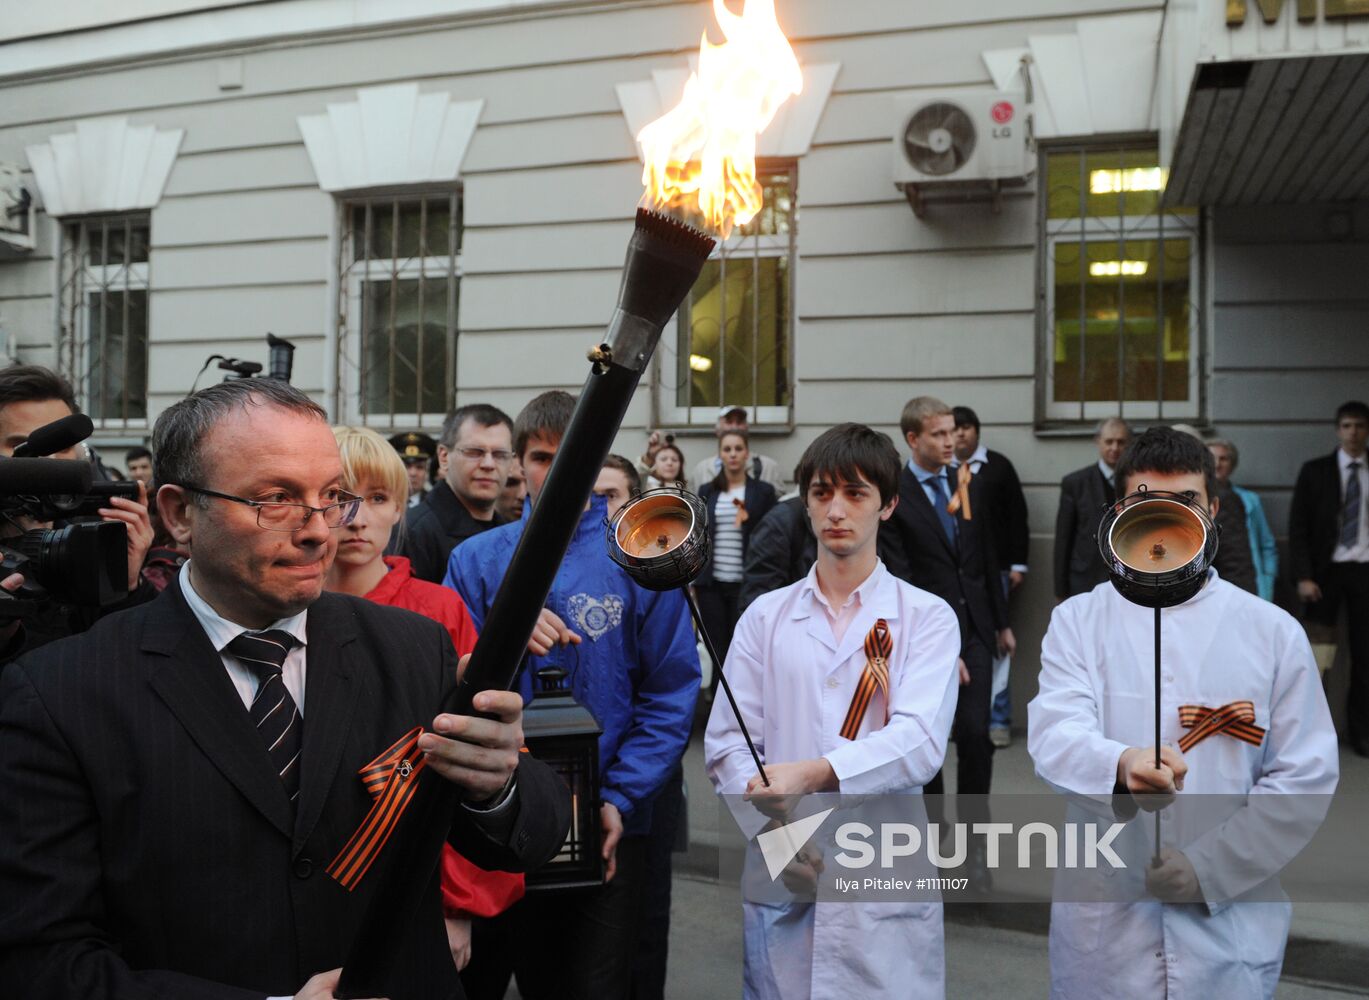 Torch procession honoring 67th anniversary of Victory in WWII